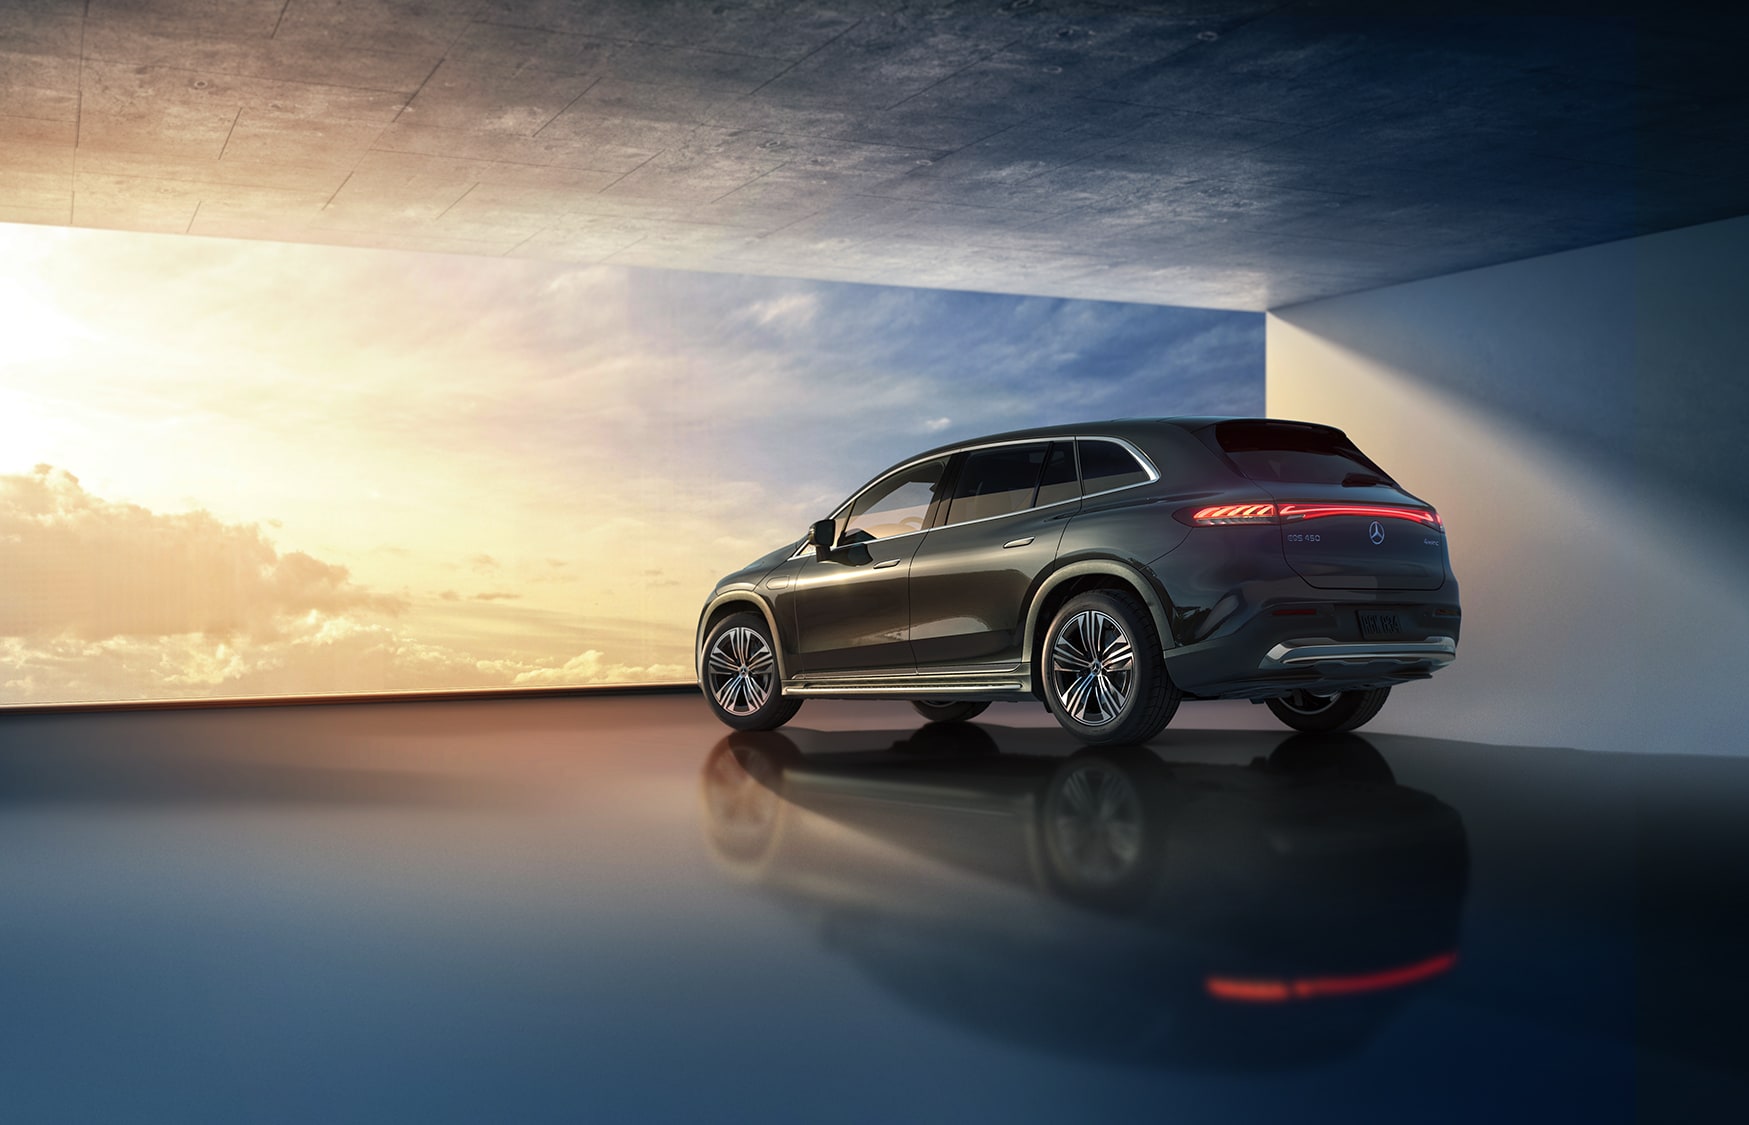  The 2022 Mercedes-Benz EQS SUV is a luxury all-wheel drive SUV that joins the brand's lineup with a sleek design, luxurious interior, and innovative features like Wireless Charging.